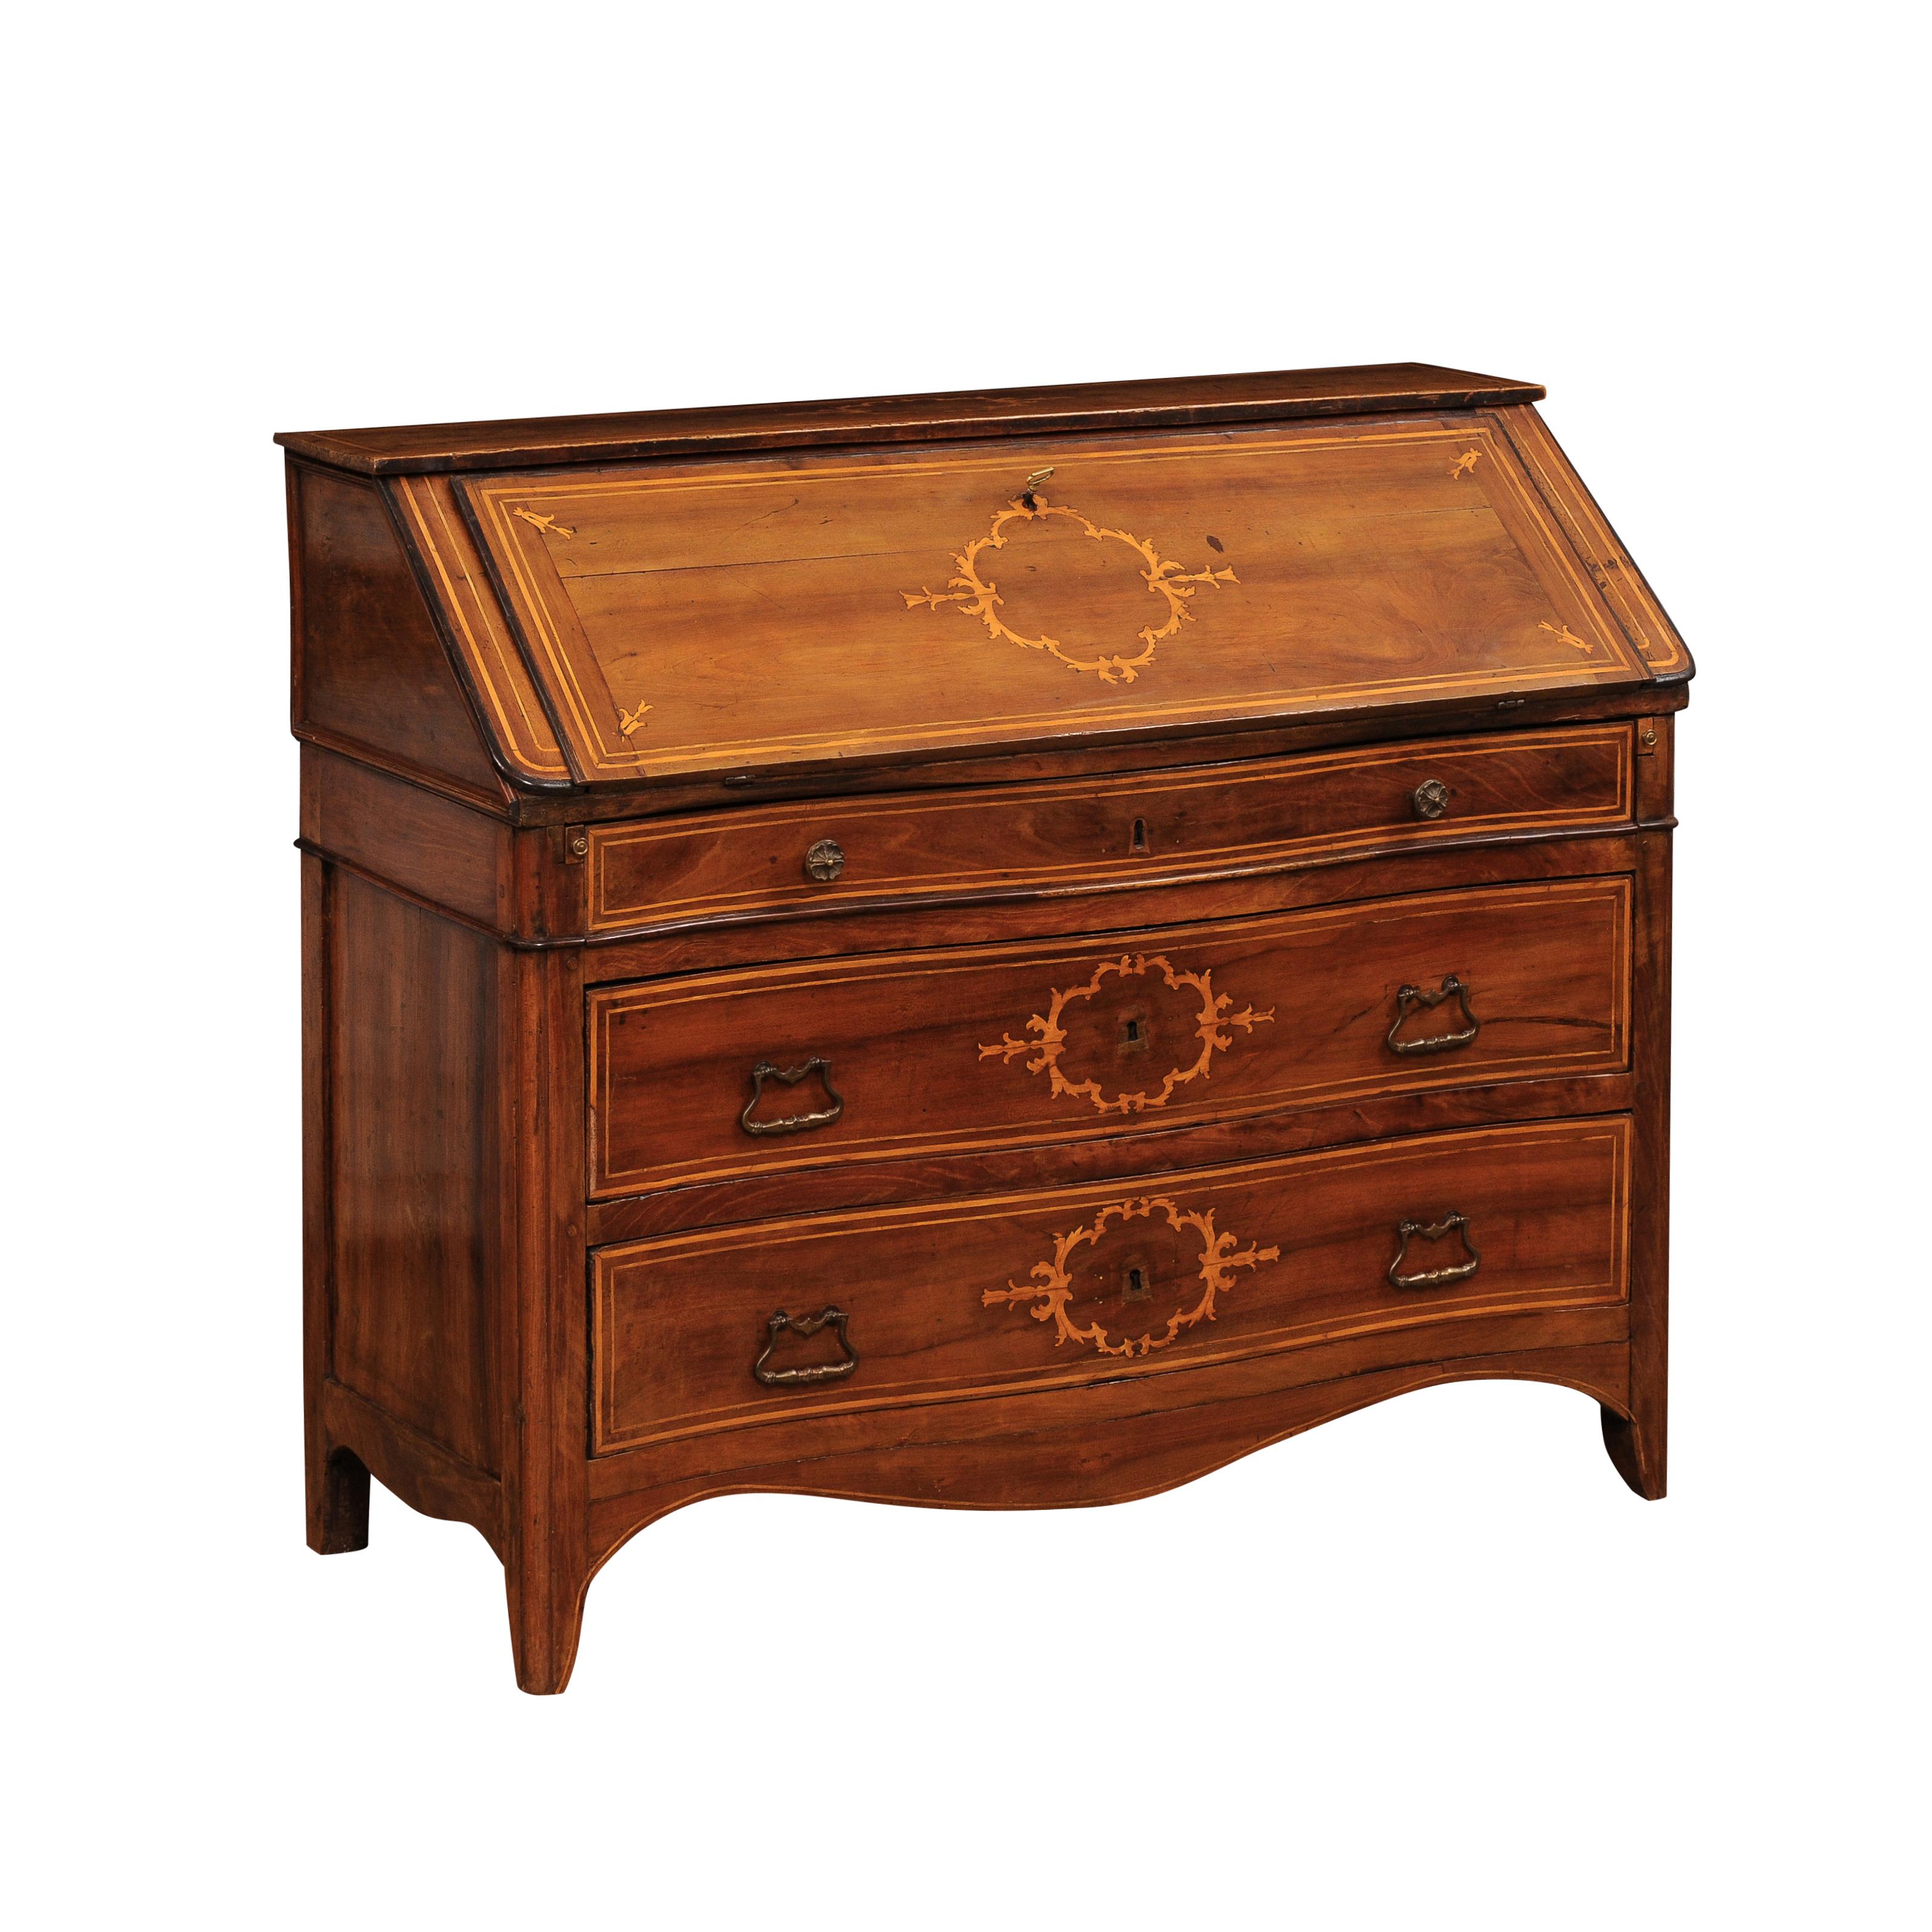 An Italian walnut and maple slant front desk, circa 1820 with marquetry décor and three graduating drawers. Immerse yourself in the elegance of Italian craftsmanship with this, circa 1820 walnut and maple slant front secretary. Expertly crafted with